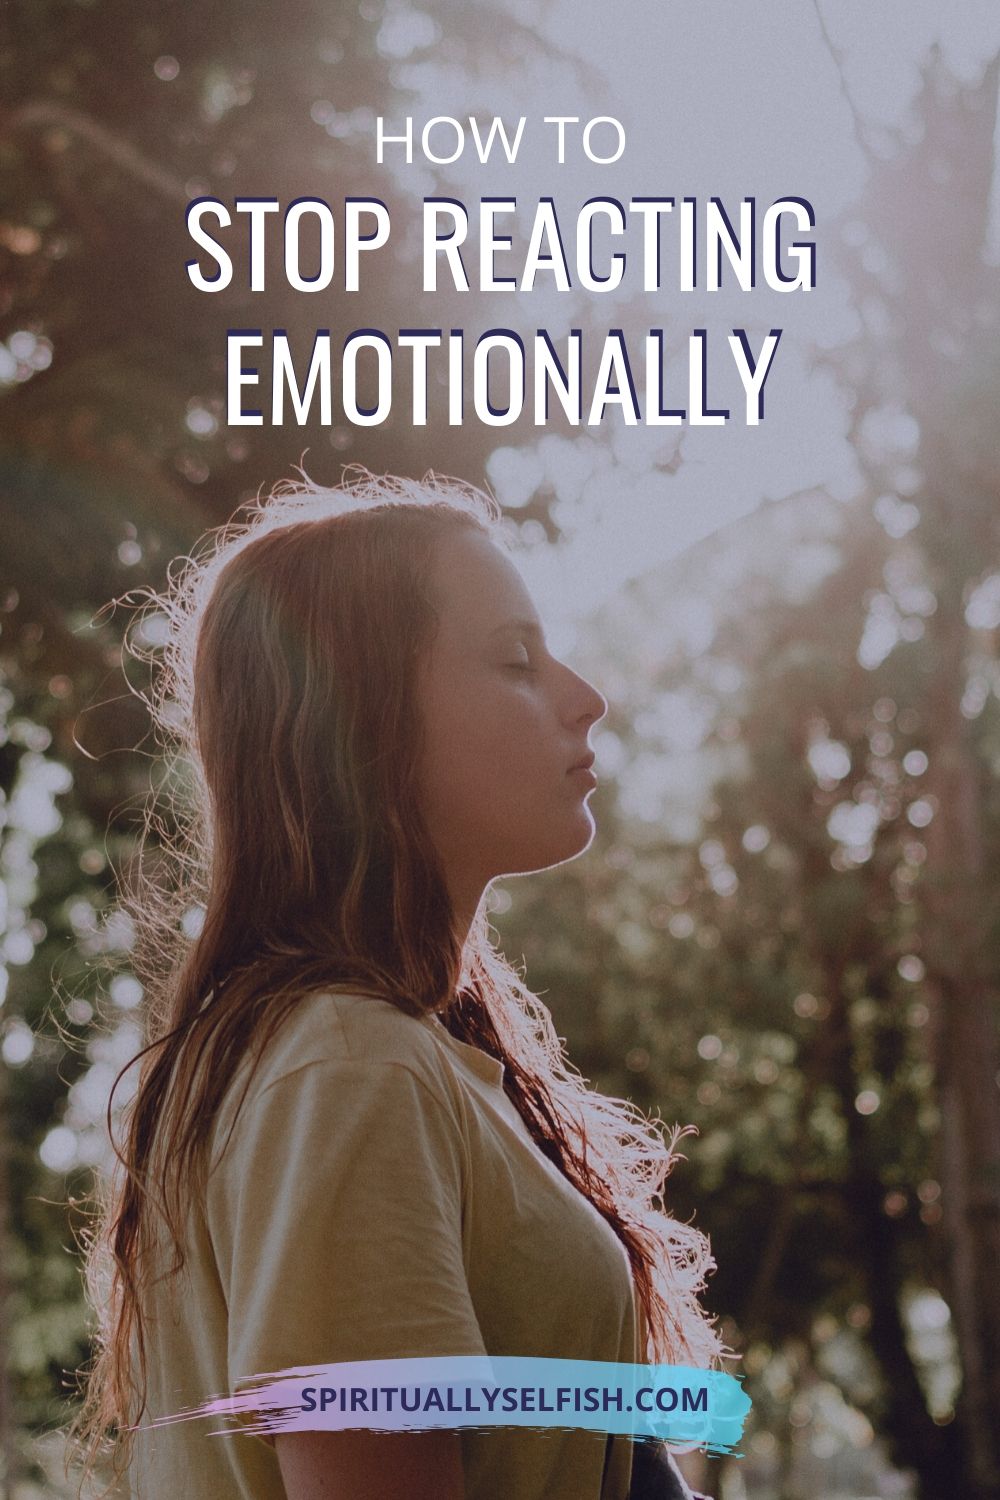 How To Stop Reacting Emotionally